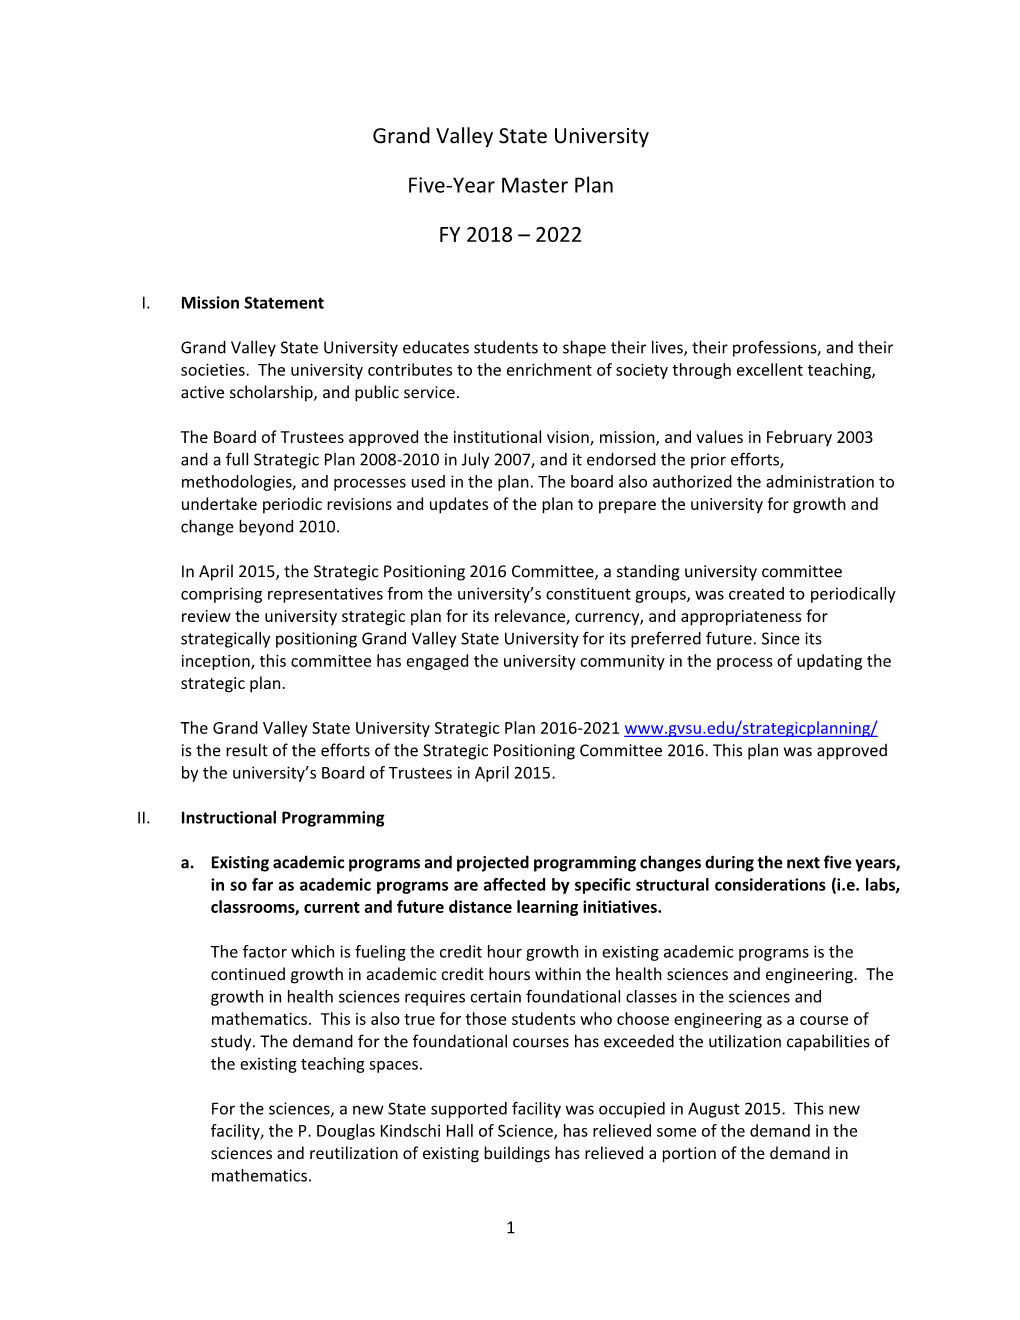 Grand Valley State University Five-Year Master Plan FY 2018 – 2022